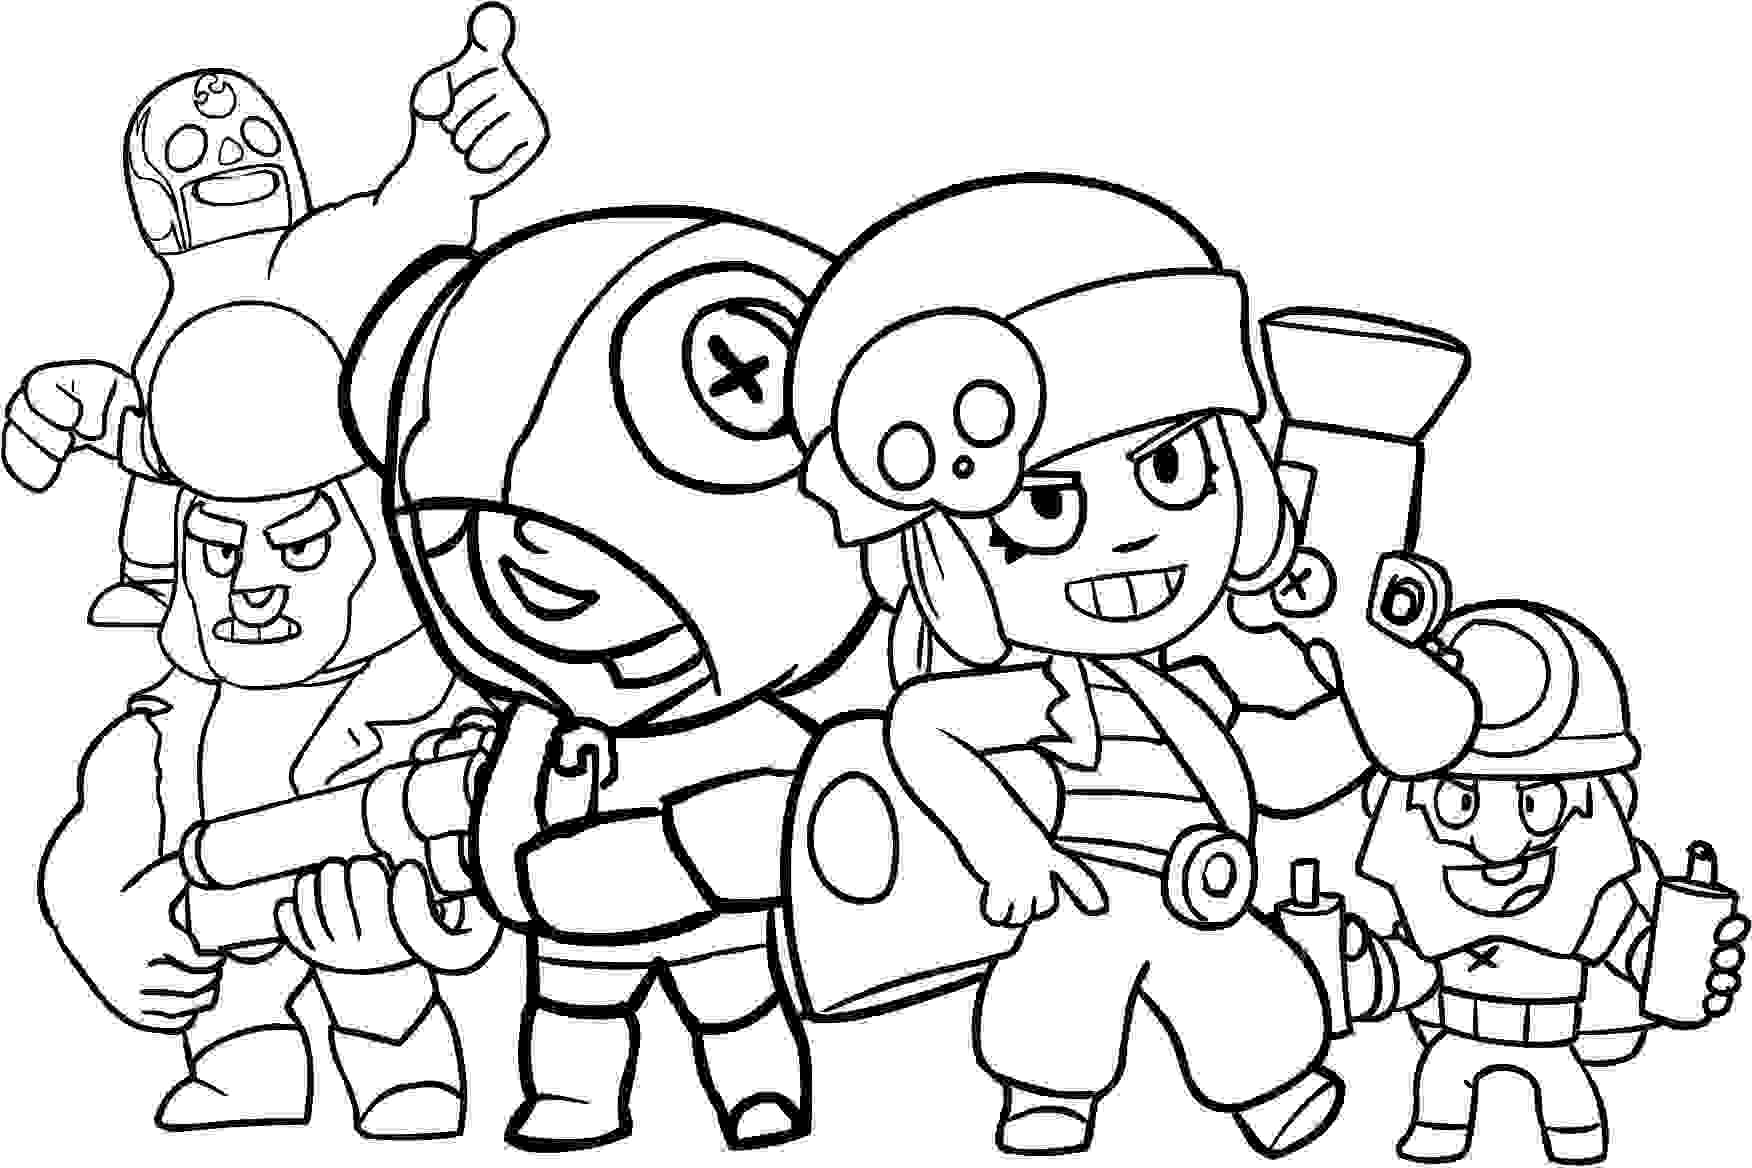 Brawl Stars Characters Dynamike Leon Penny El Primo And Bull Coloring Pages Brawl Stars Coloring Pages Coloring Pages For Kids And Adults - brawl stars characters black and white